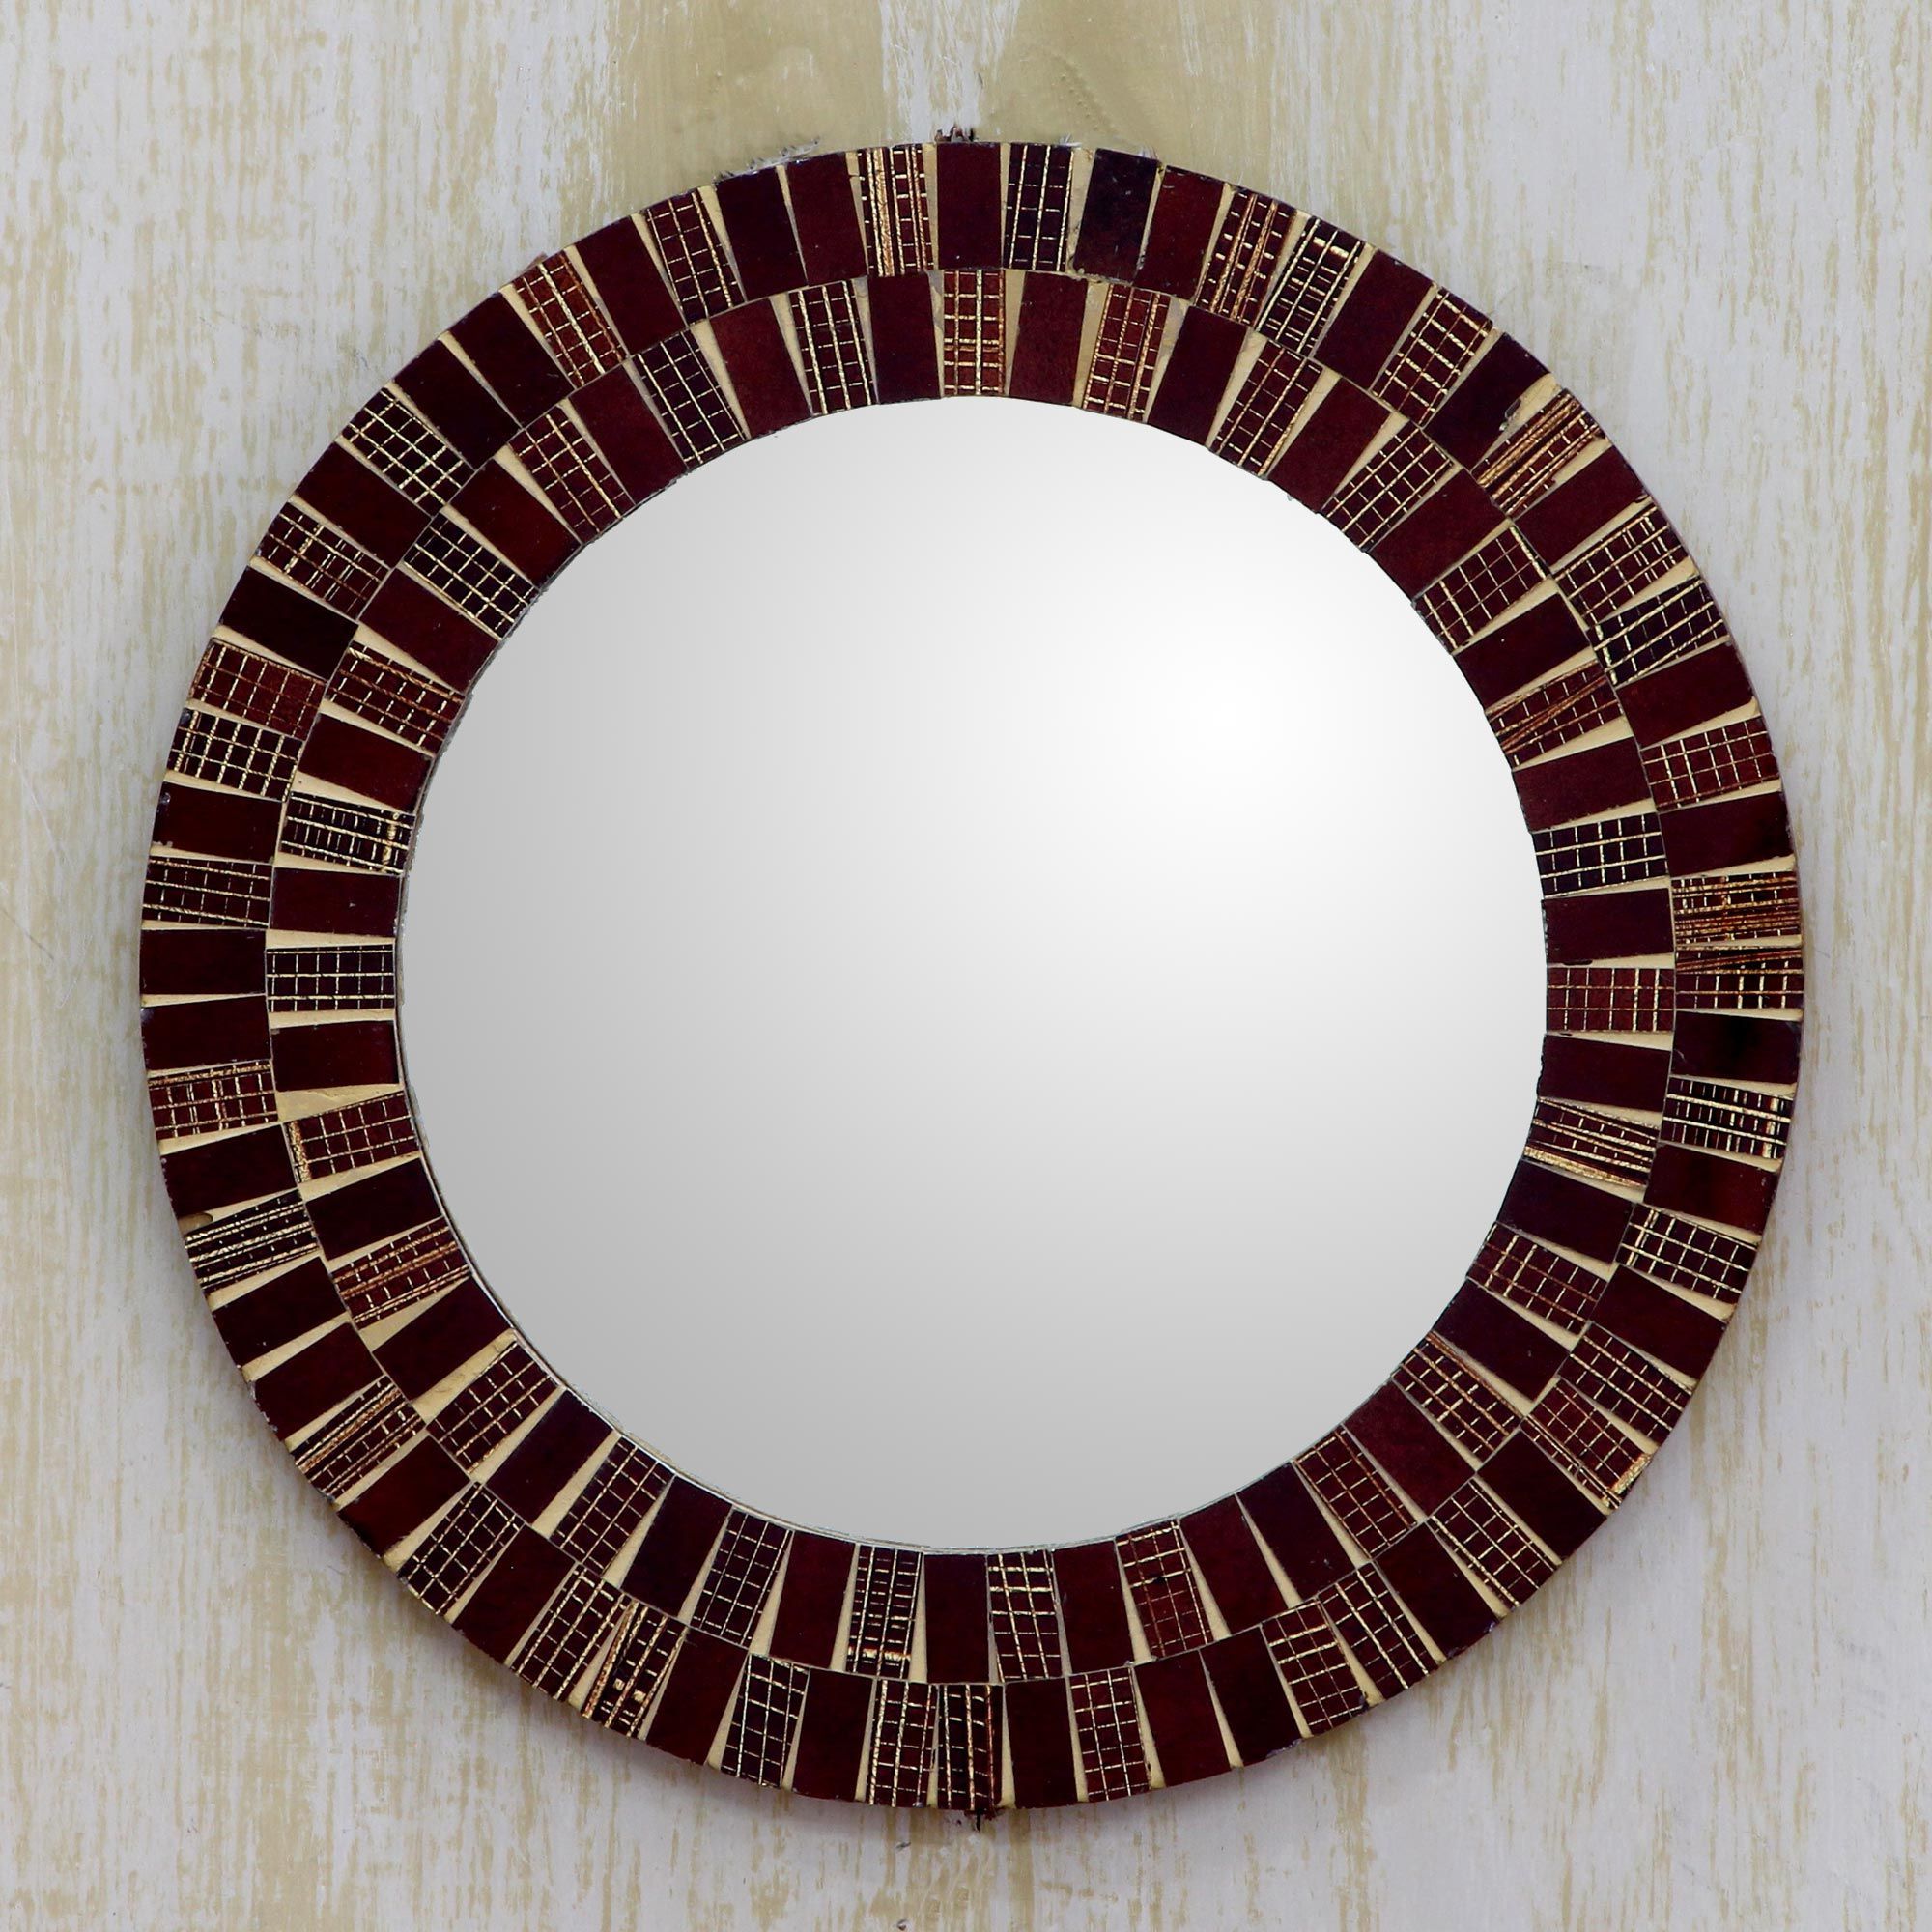 Trendy Golden Voyage Round Wall Mirrors For Buy Glass Mosaic Mirror, 'golden Flames' Today (View 7 of 15)